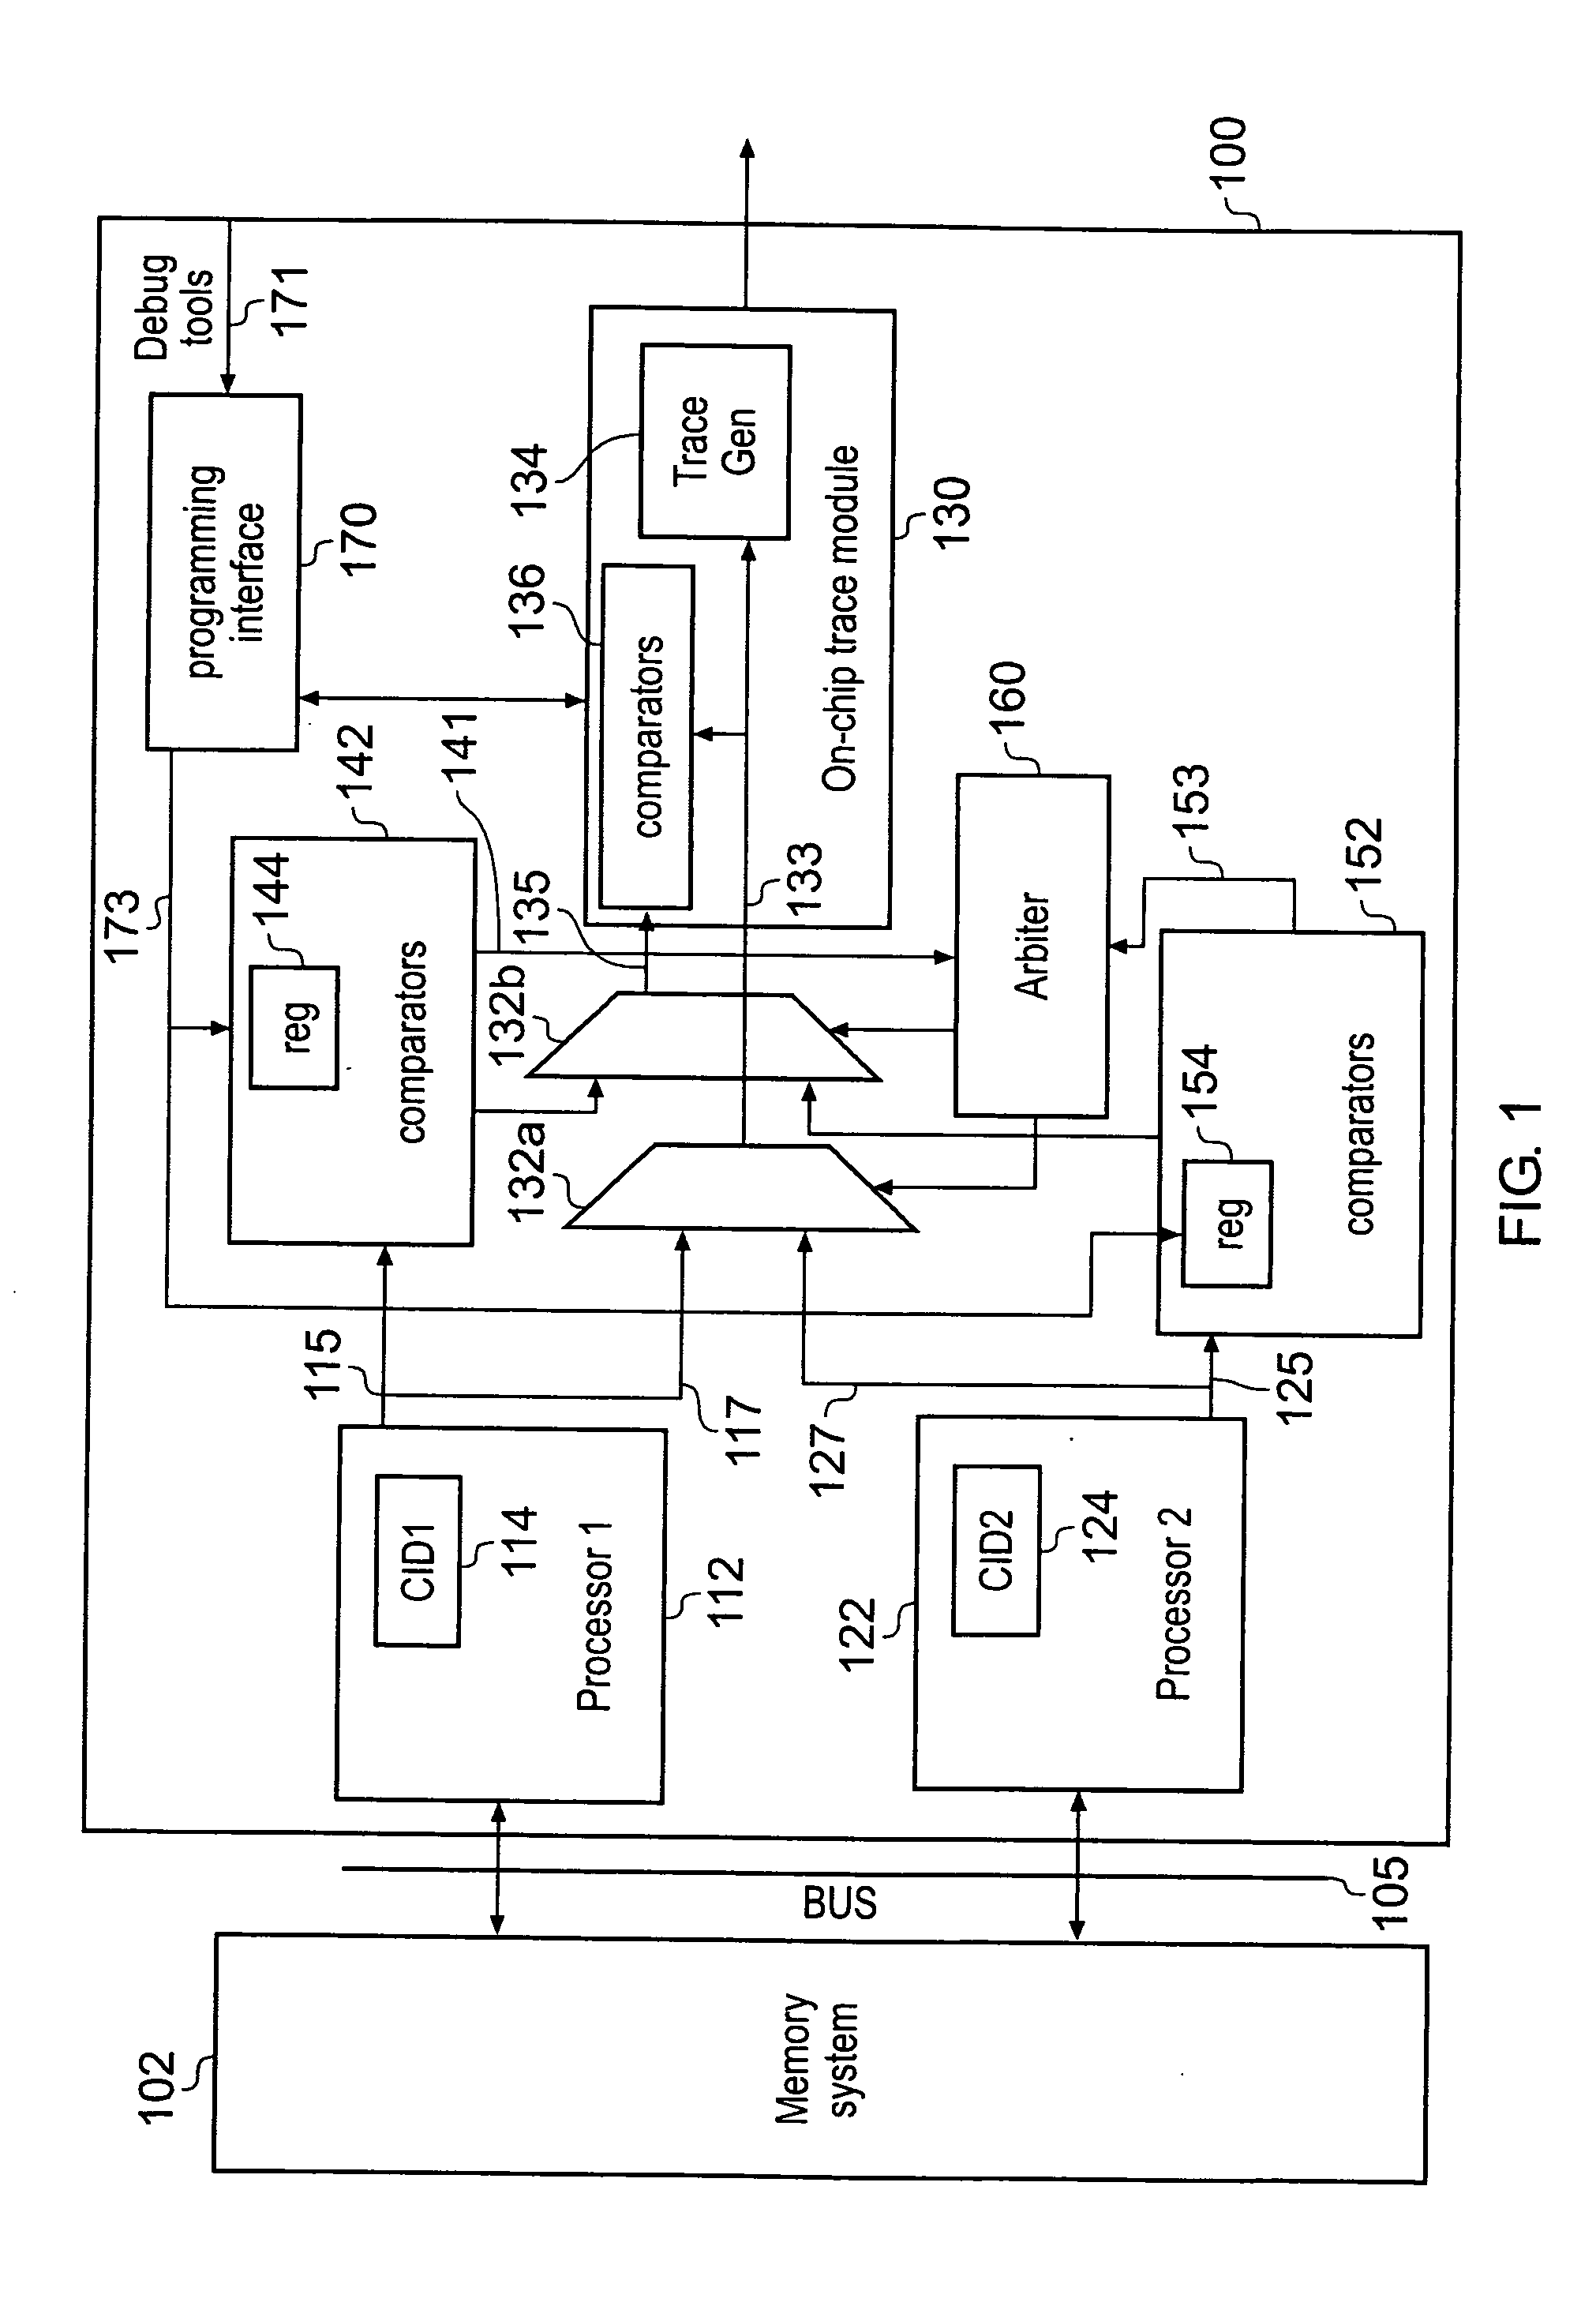 Generation of trace data in a multi-processor system